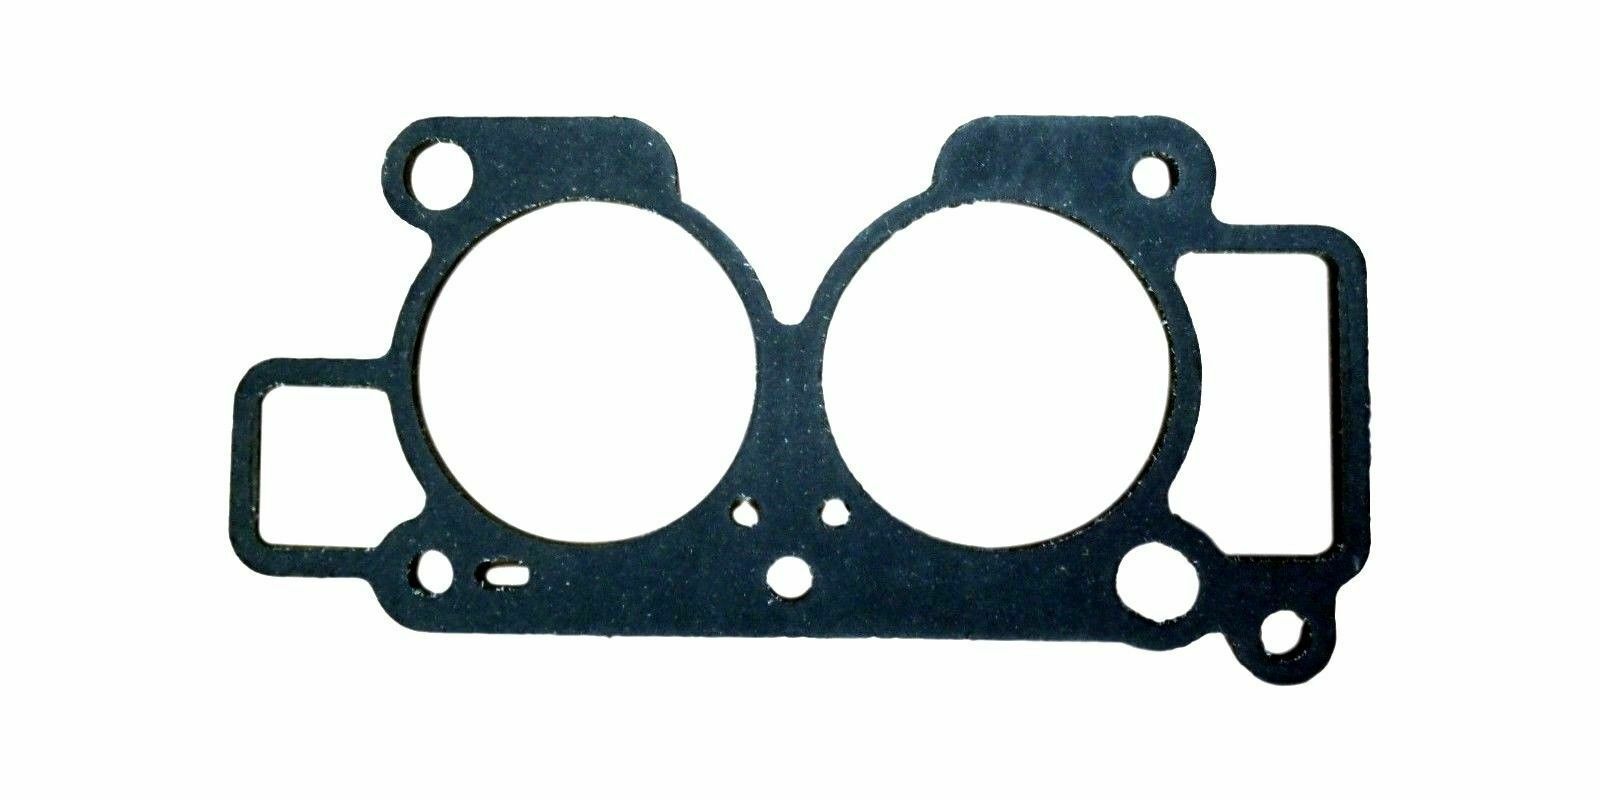 Primary image for Motorcraft Ford CG-516 D8DZ-9516-A Carburetor Fuel Injection Gasket 1 Piece NEW